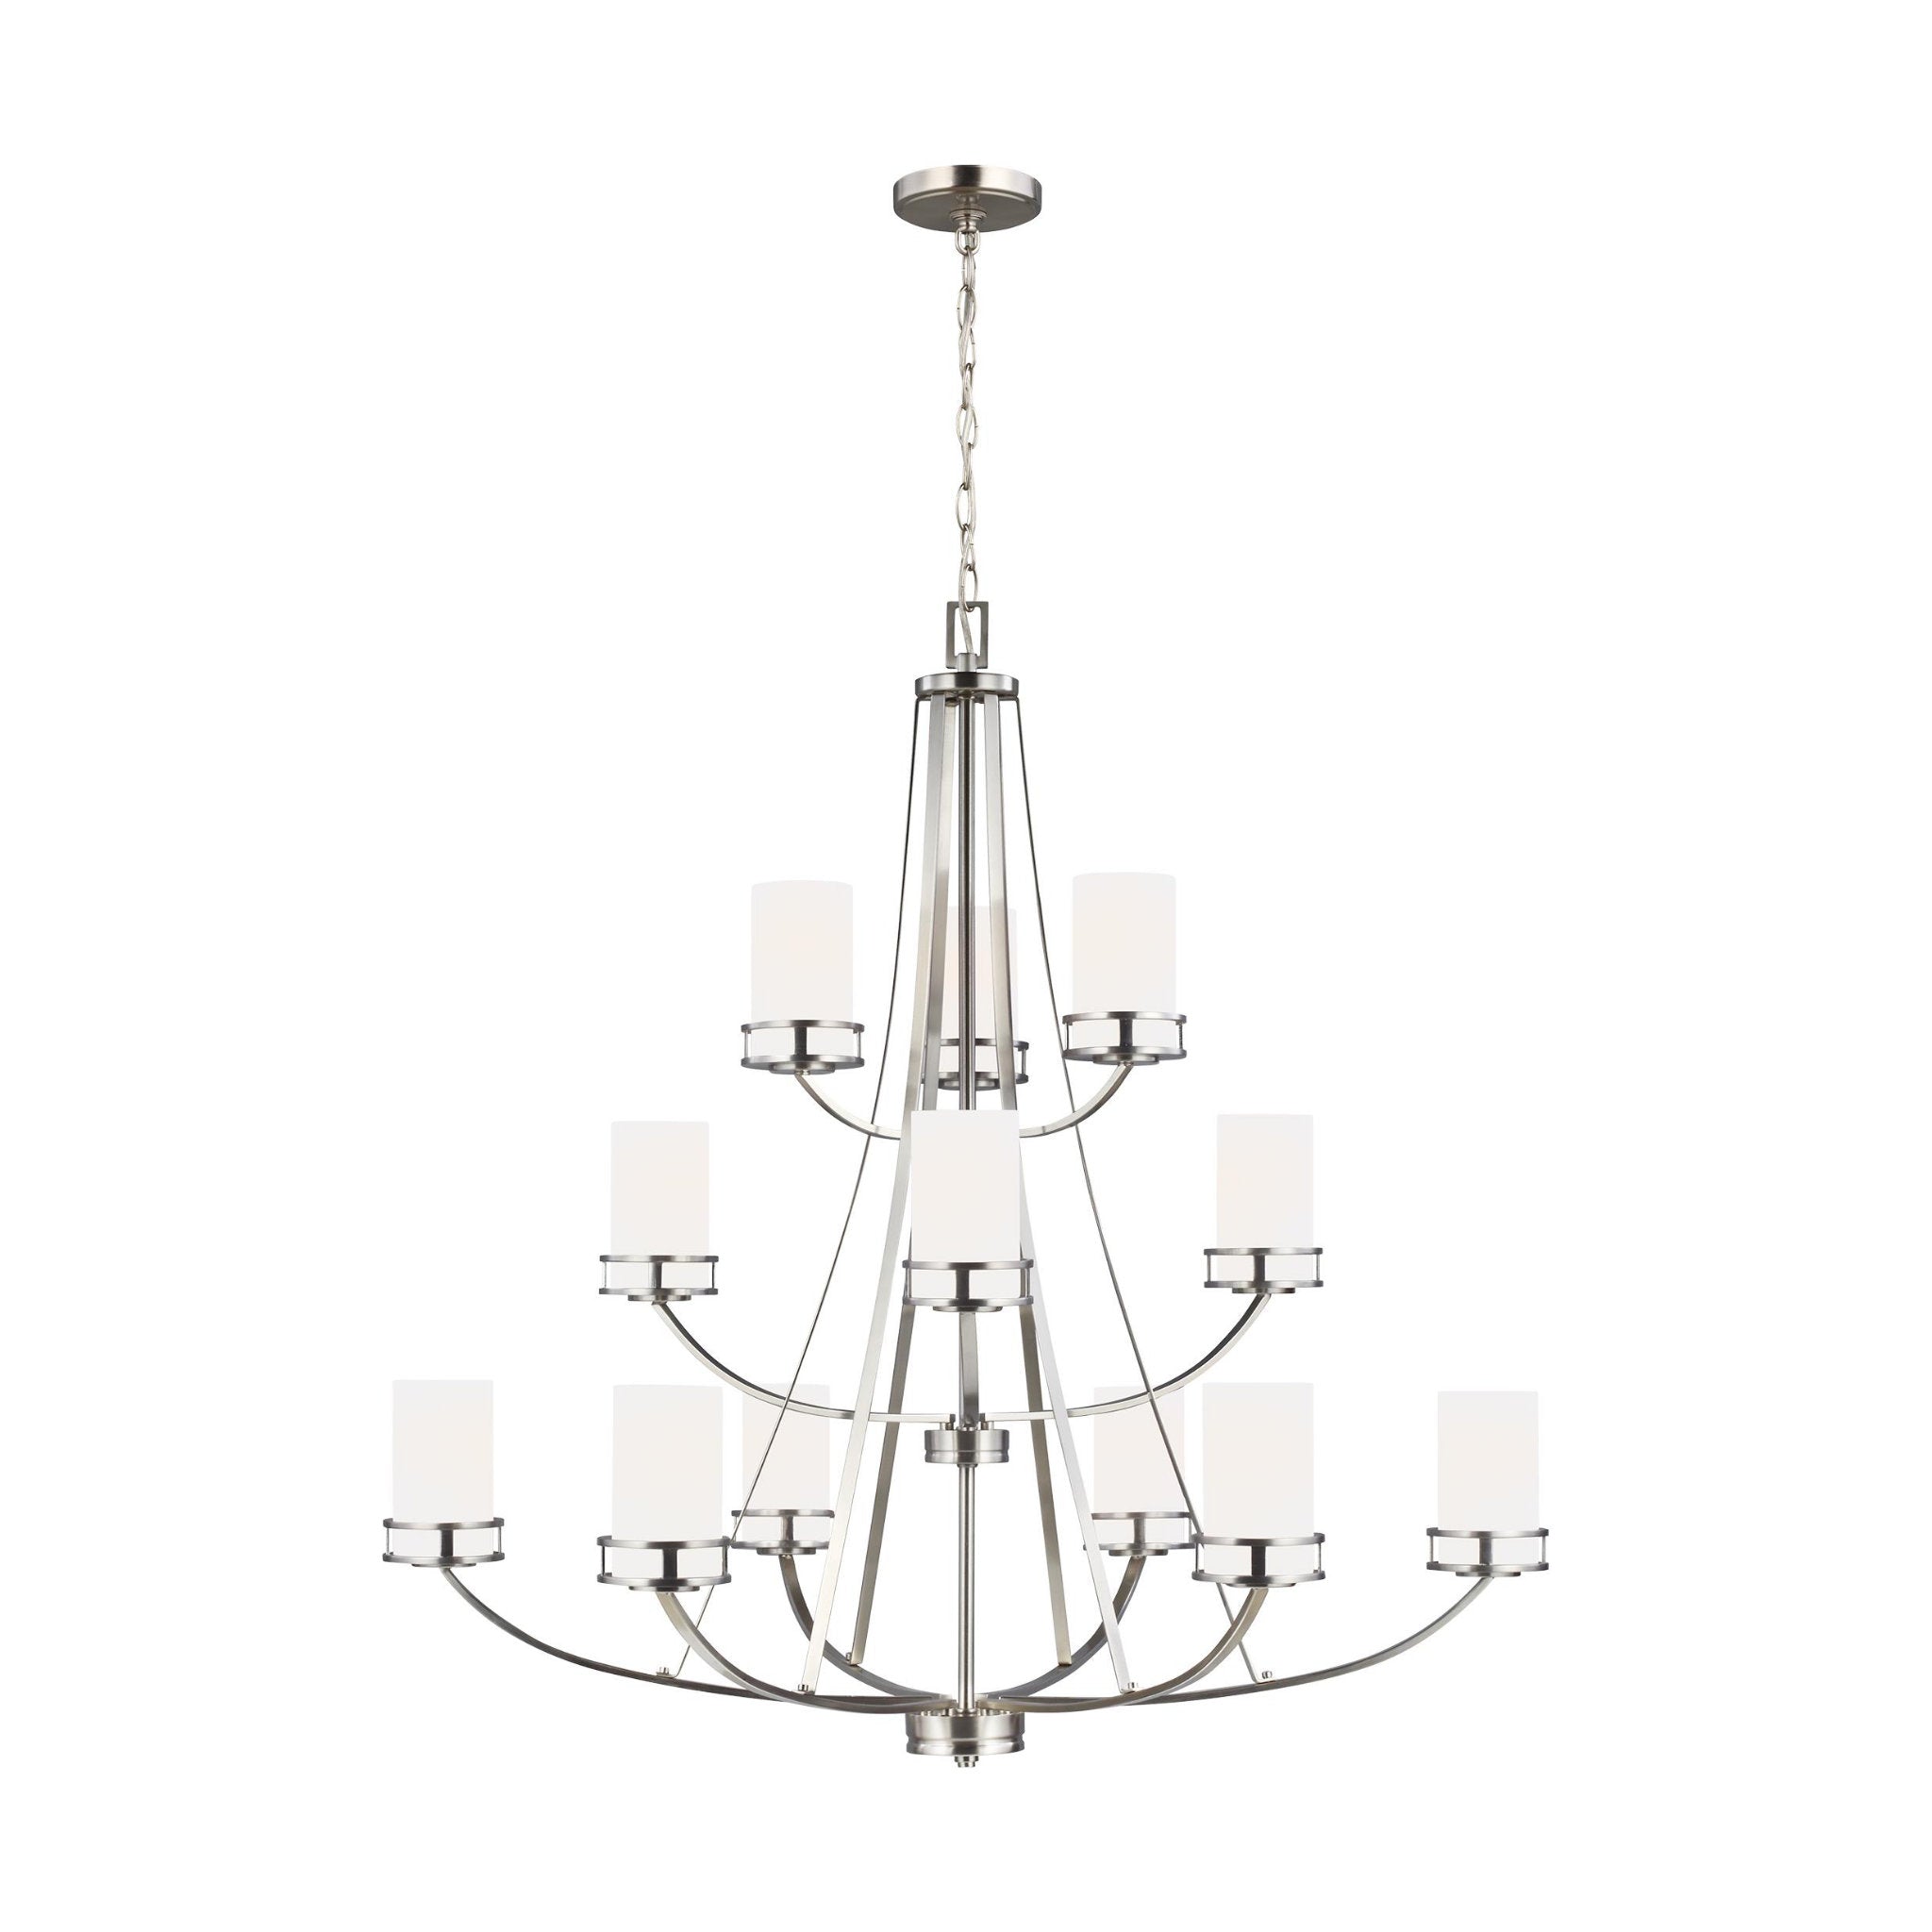 Robie Twelve Light Chandelier Transitional 40.625" Height Steel Round Etched / White Inside Shade in Brushed Nickel